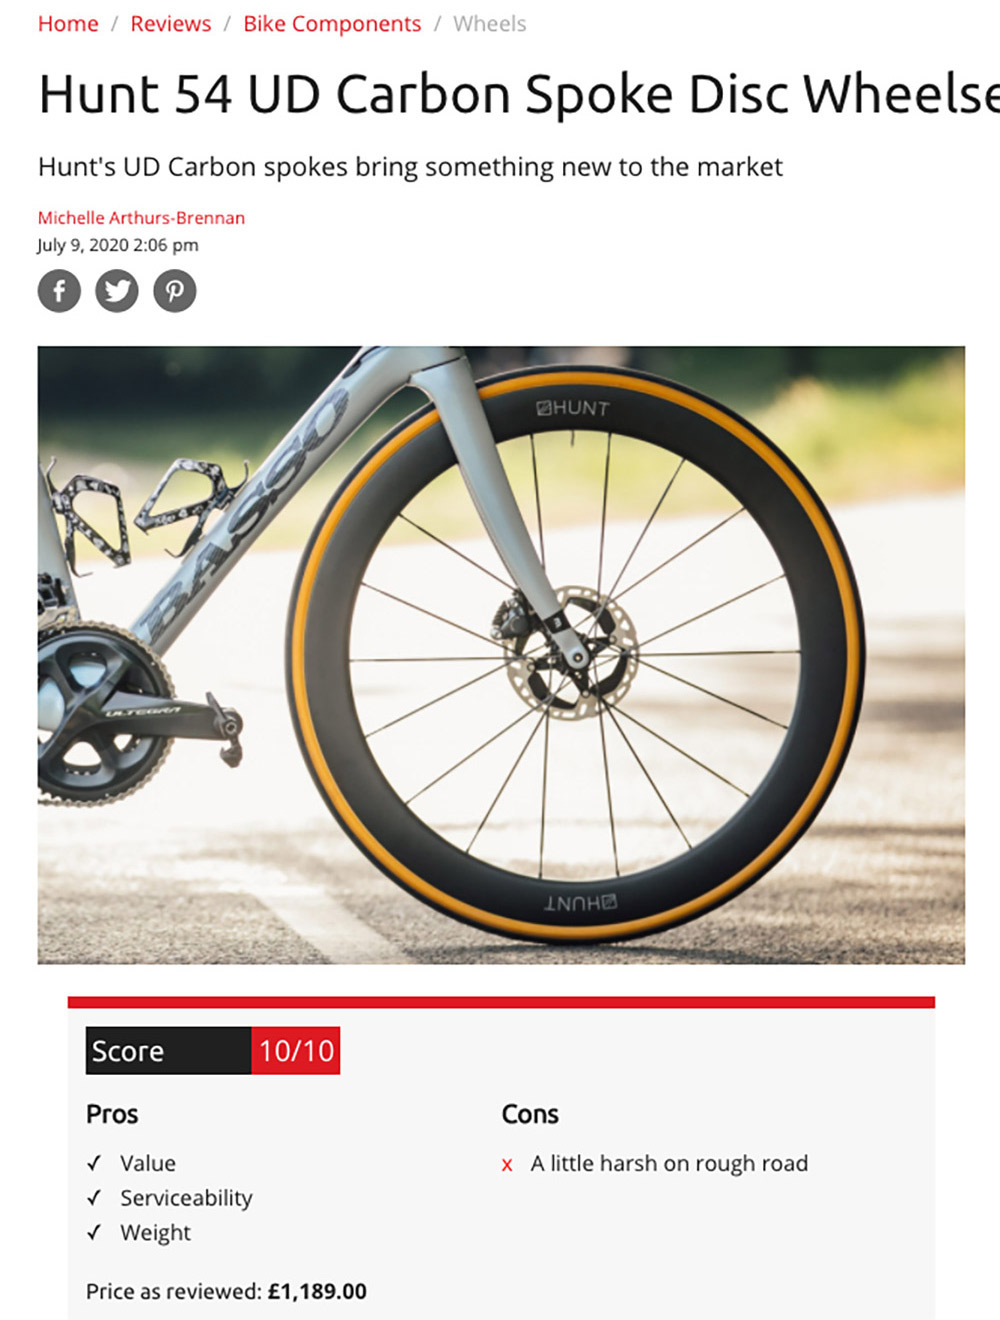 Cycling Weekly 10/10 review HUNT 54 UD Carbon Spoke